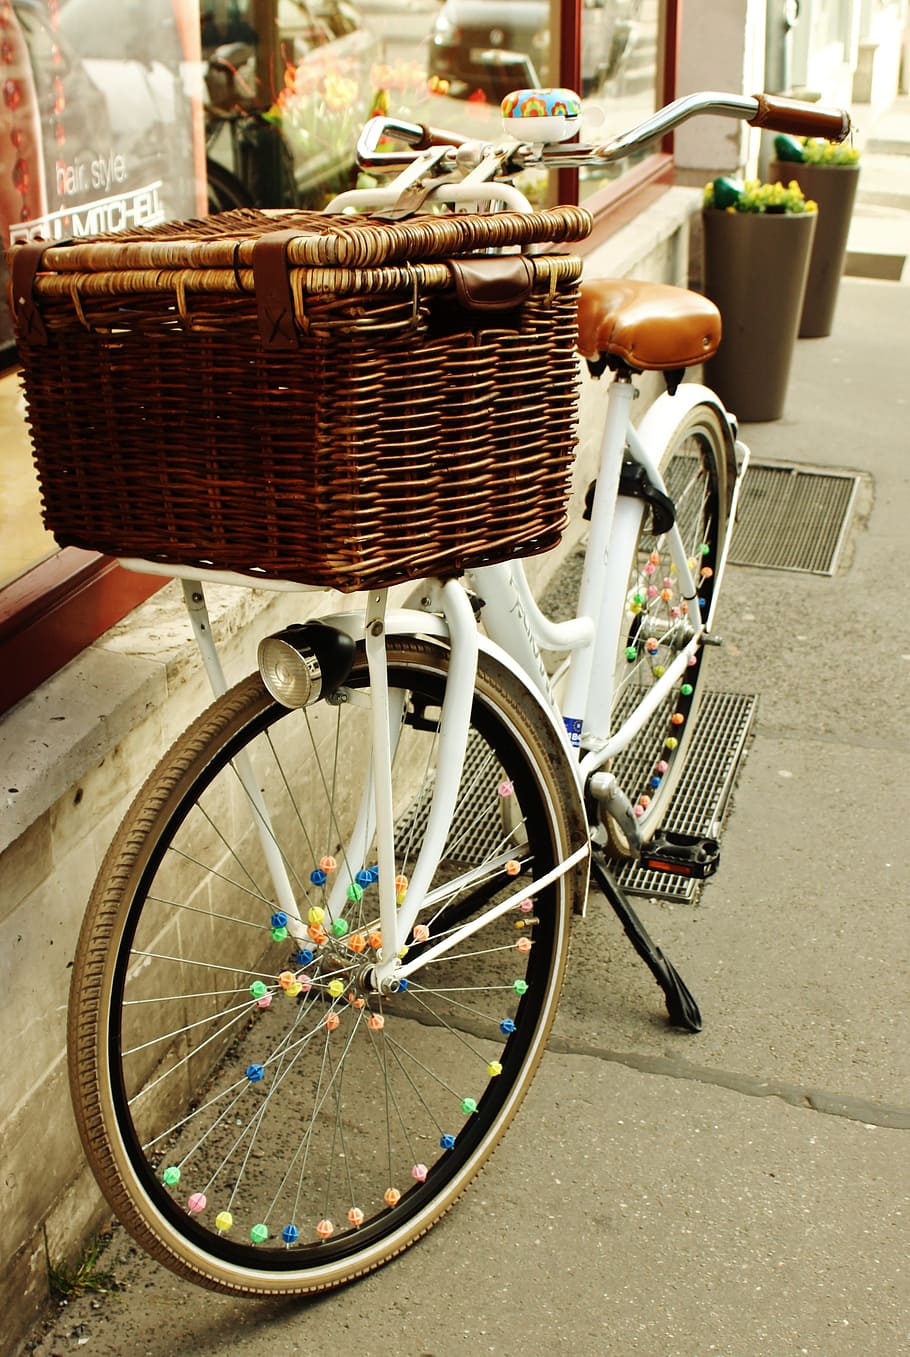 Bike, Bicycle, City, Cycle, Spring, bicycle, city, leisure, basket, cycling, wheel